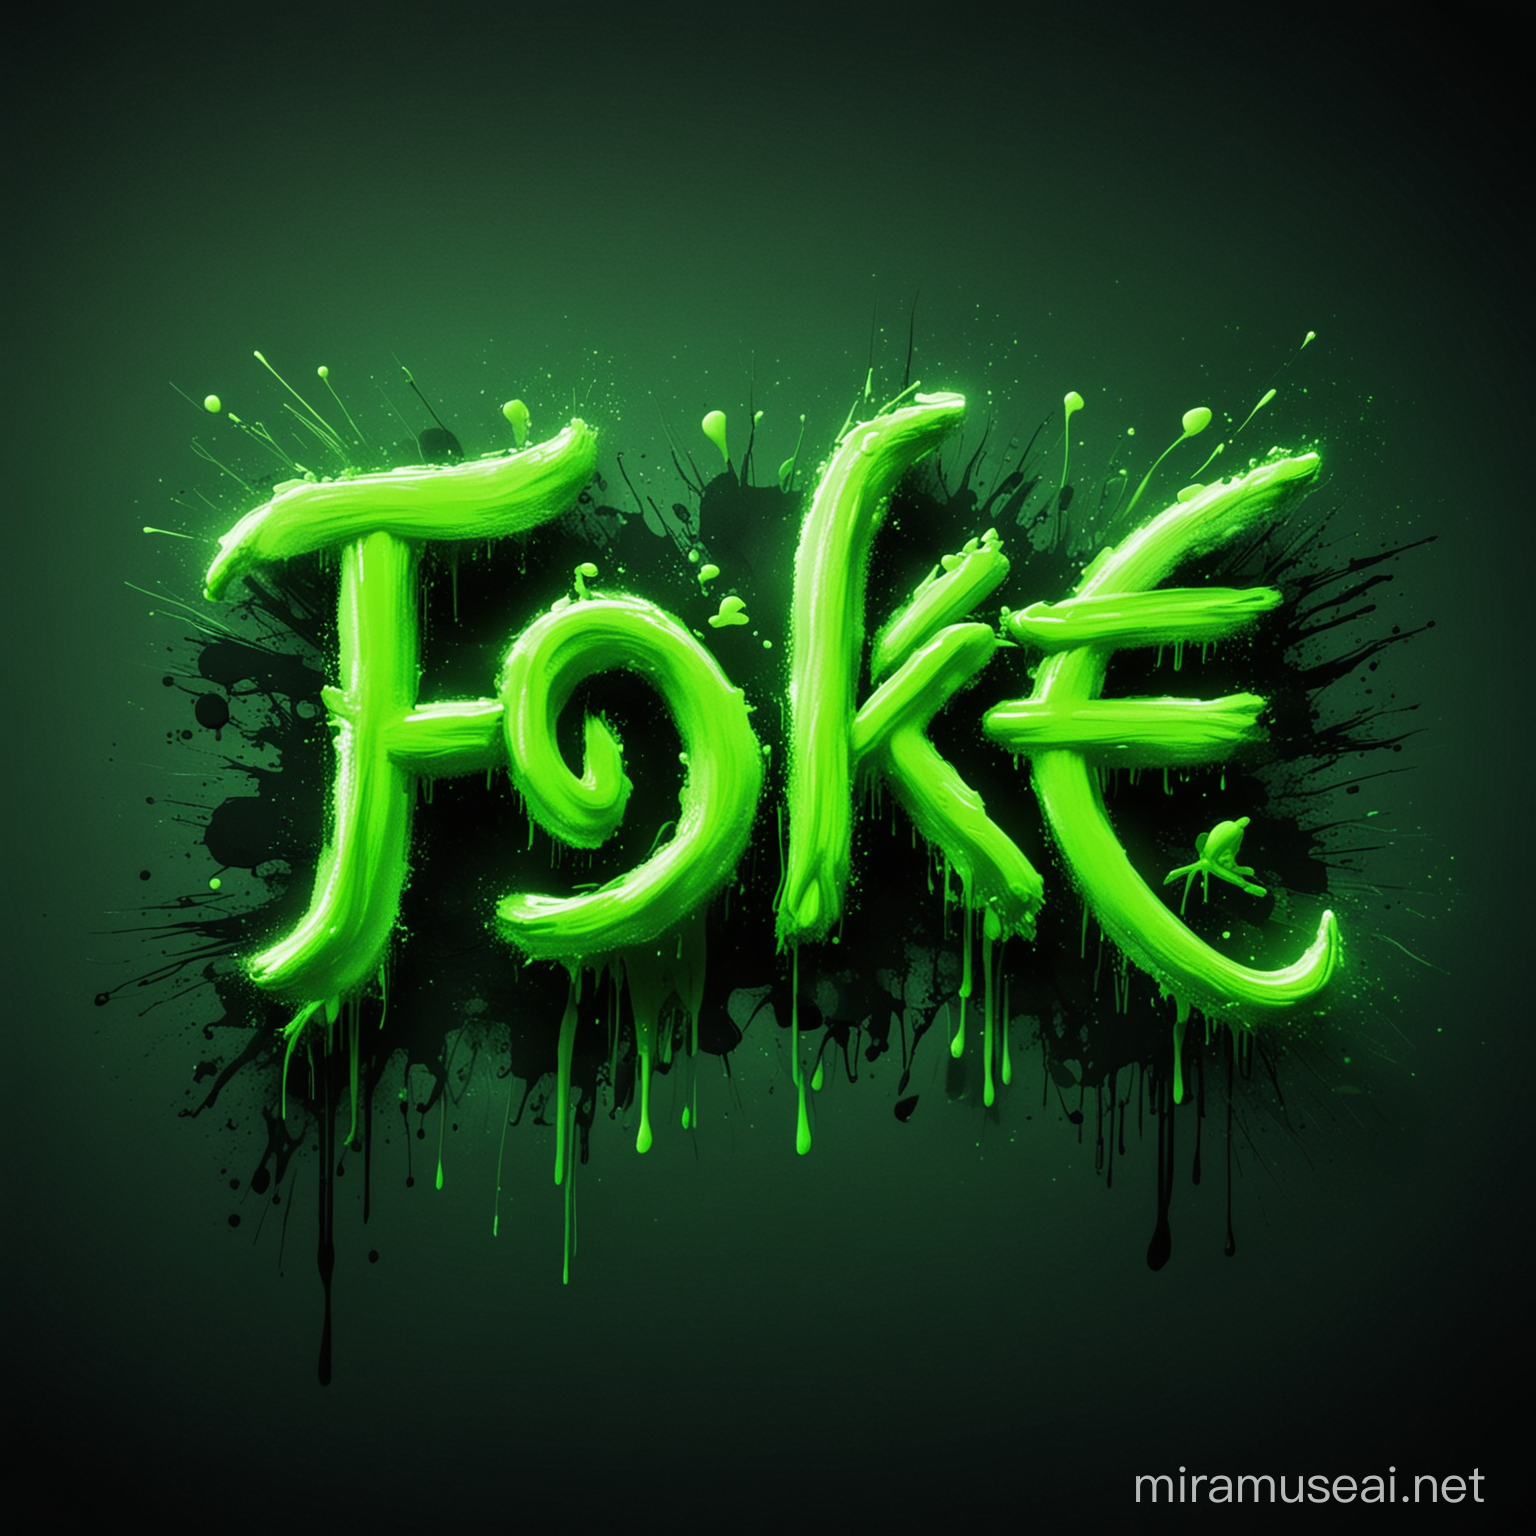 nickname="FOKE1" green neon style nickname Symbol with  brush and paints